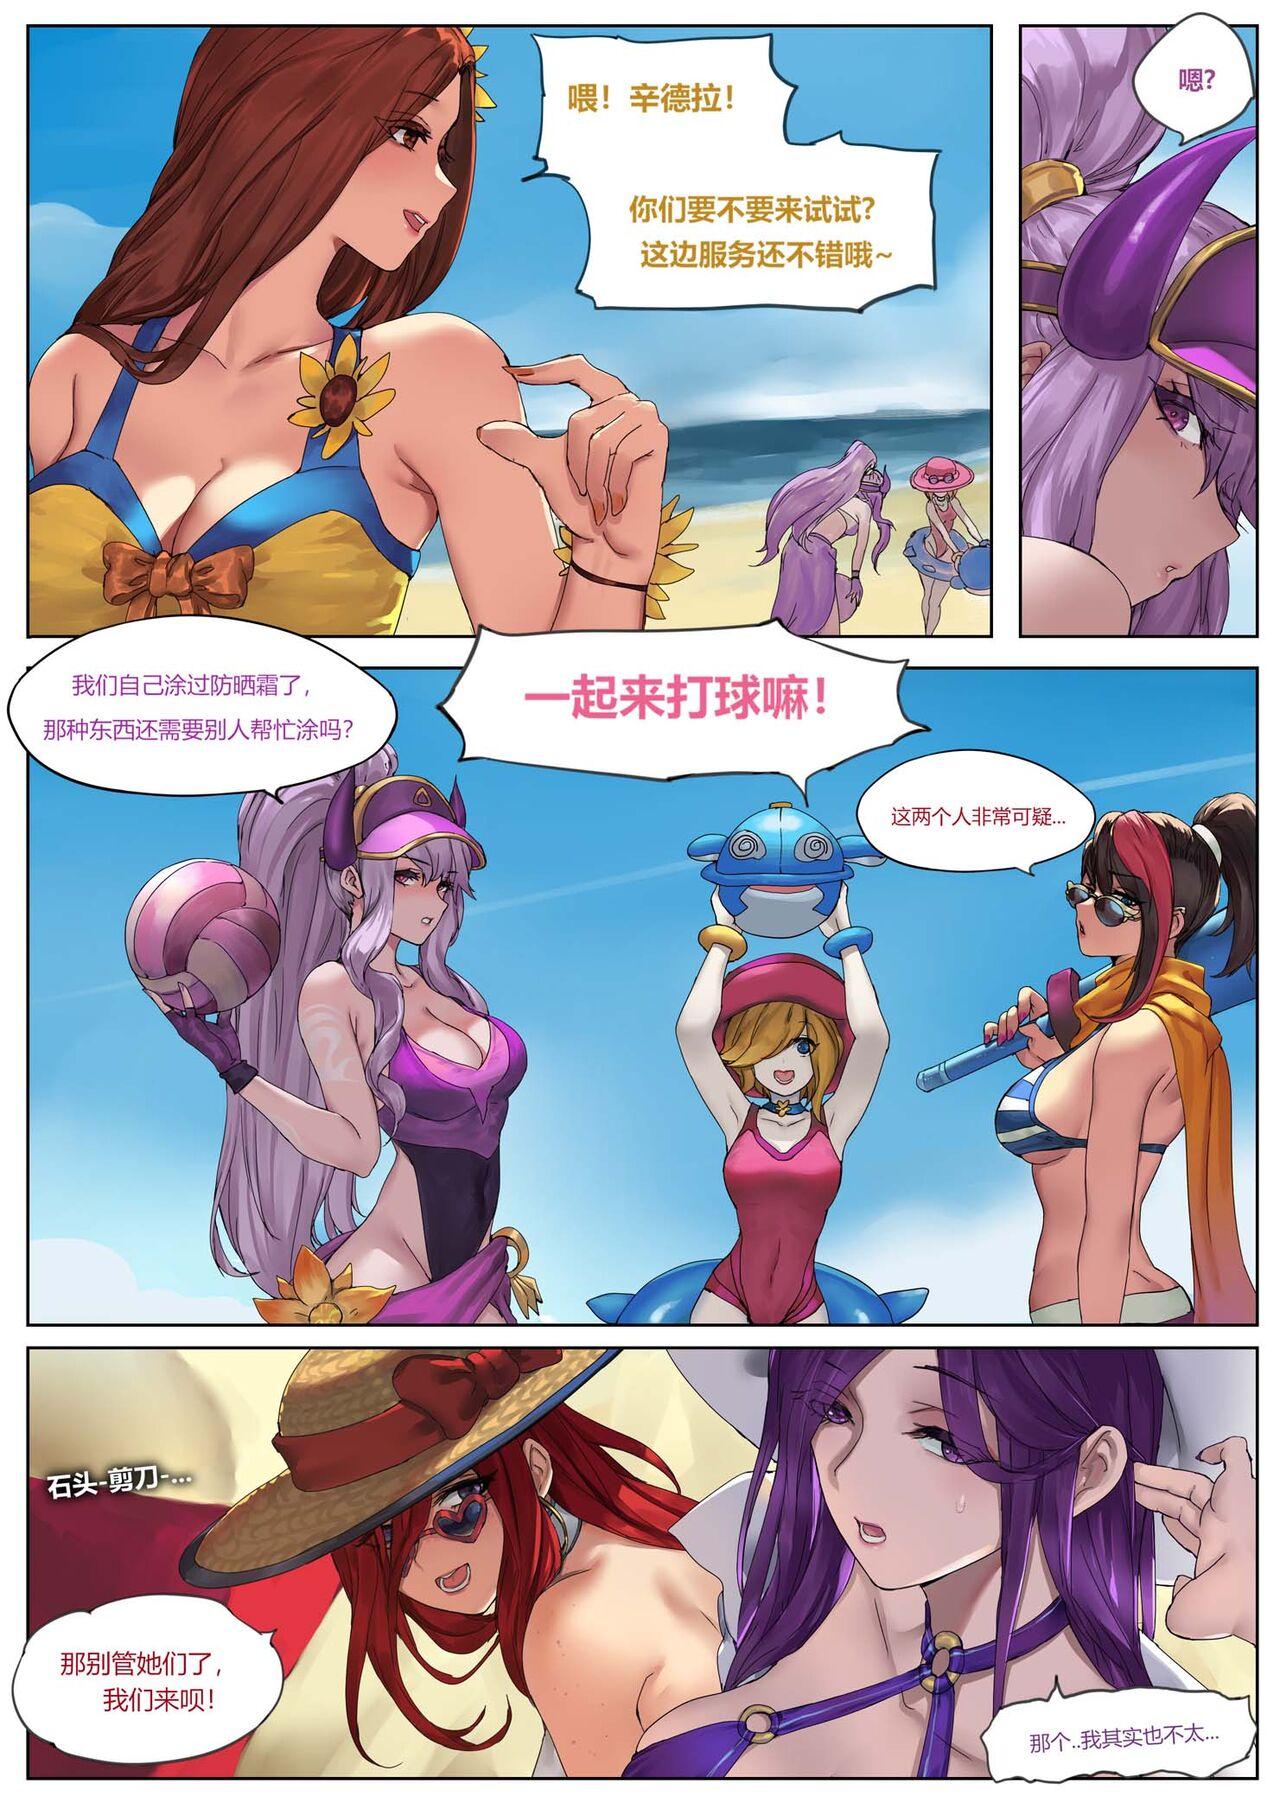 Old 泳池派对2 - League of legends Teenpussy - Page 3